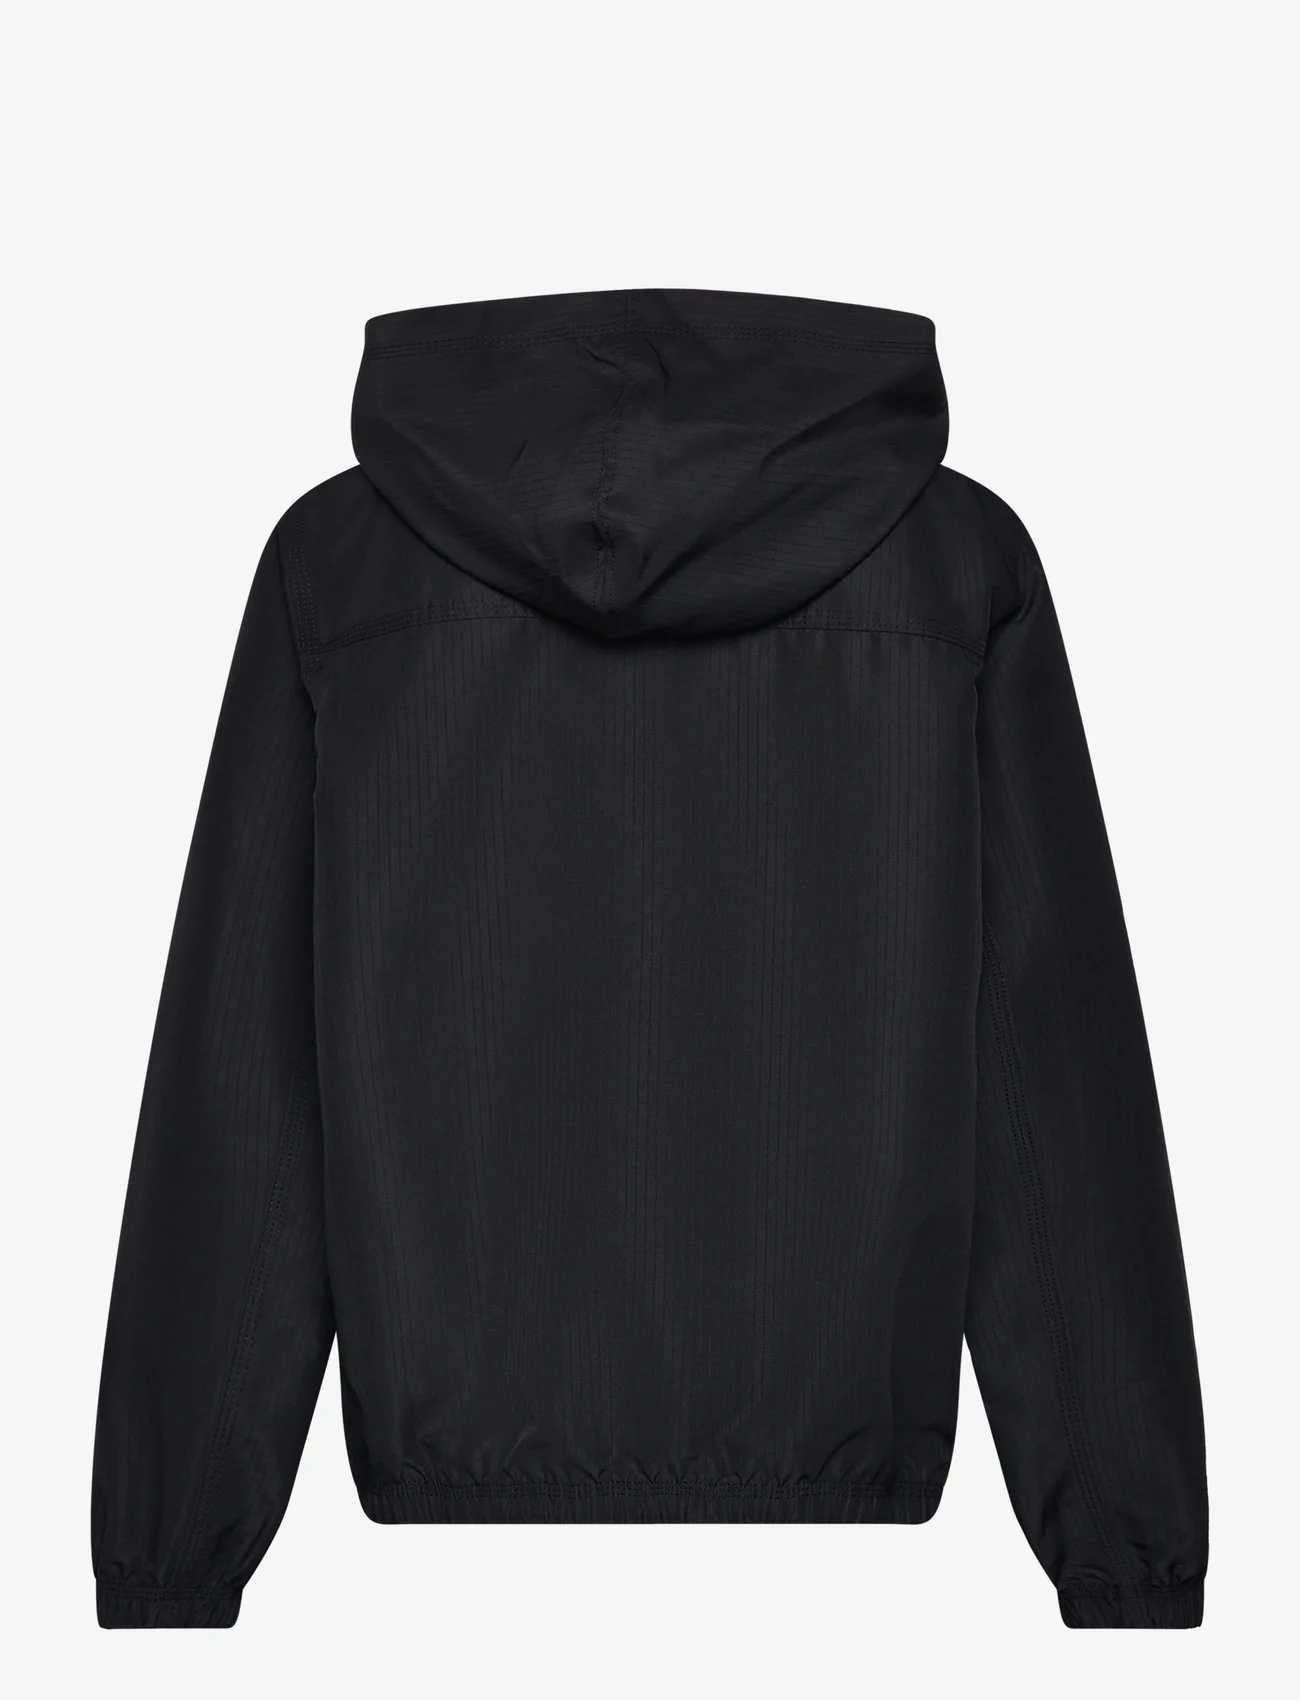 Converse - GEARED UP LAYERING PO / GEARED UP LAYERING PO - hoodies - black - 1